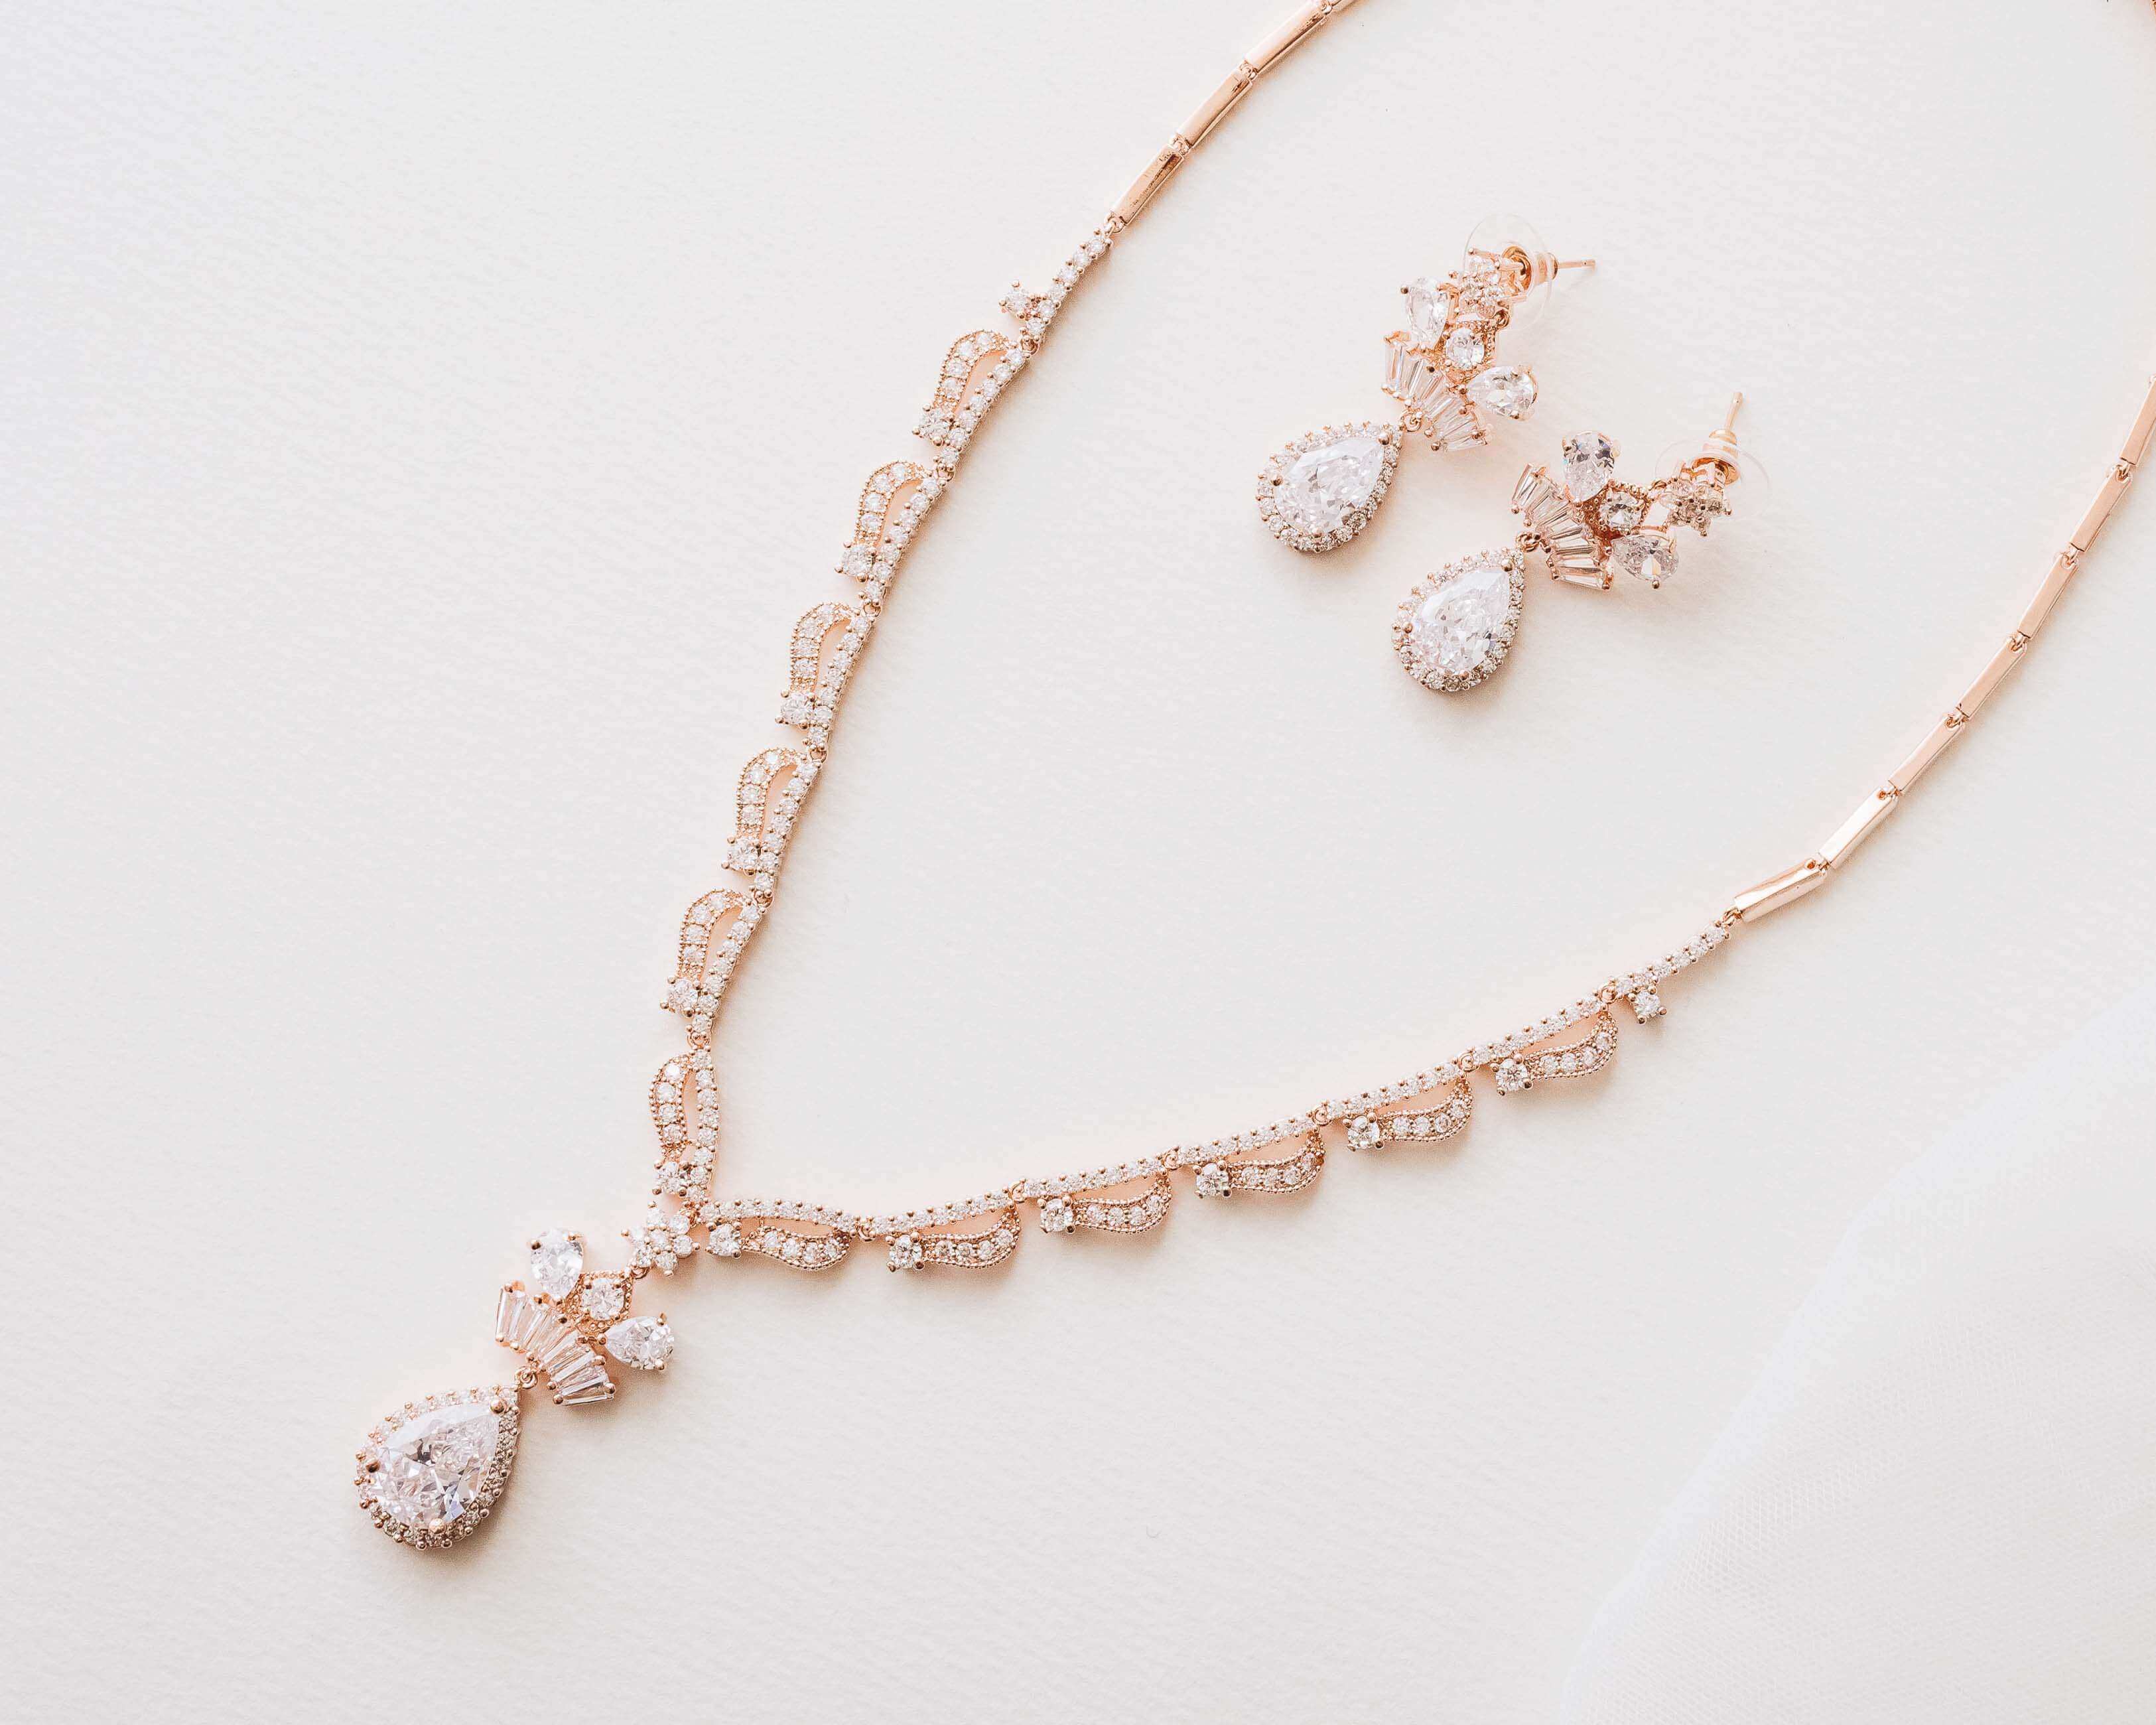 Rosegold Crystal Necklace Jewelry Set - The perfect wedding jewelry.